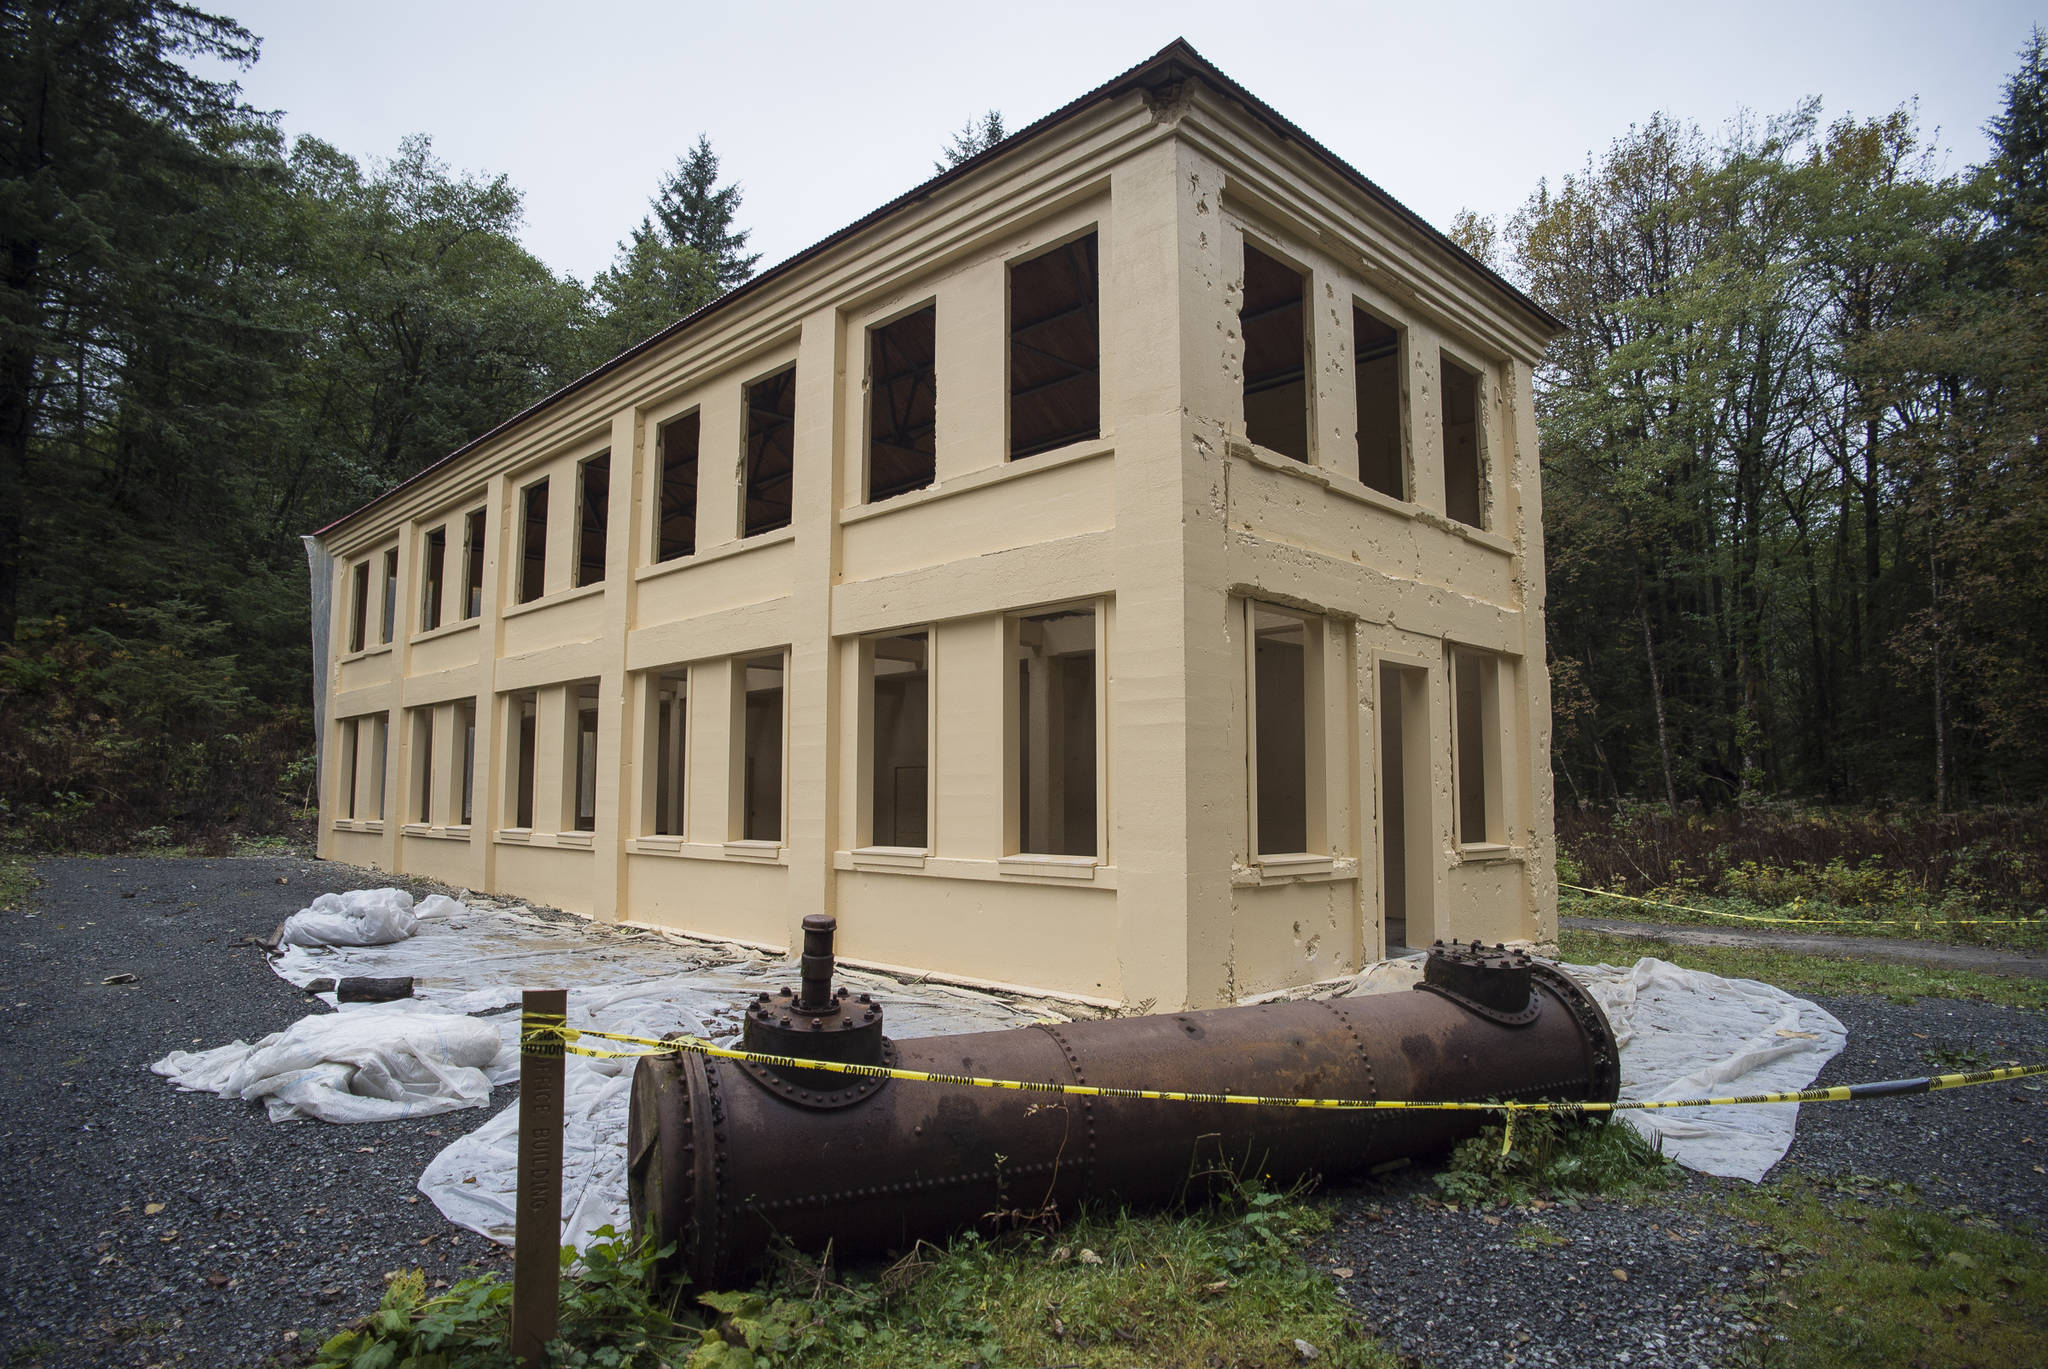 The New Office Building at the Treadwell Mine Historic Area, shown on Thursday, Oct. 11, 2018, has received a new metal roof and a fresh coat of paint inside and out. (Michael Penn | Juneau Empire)